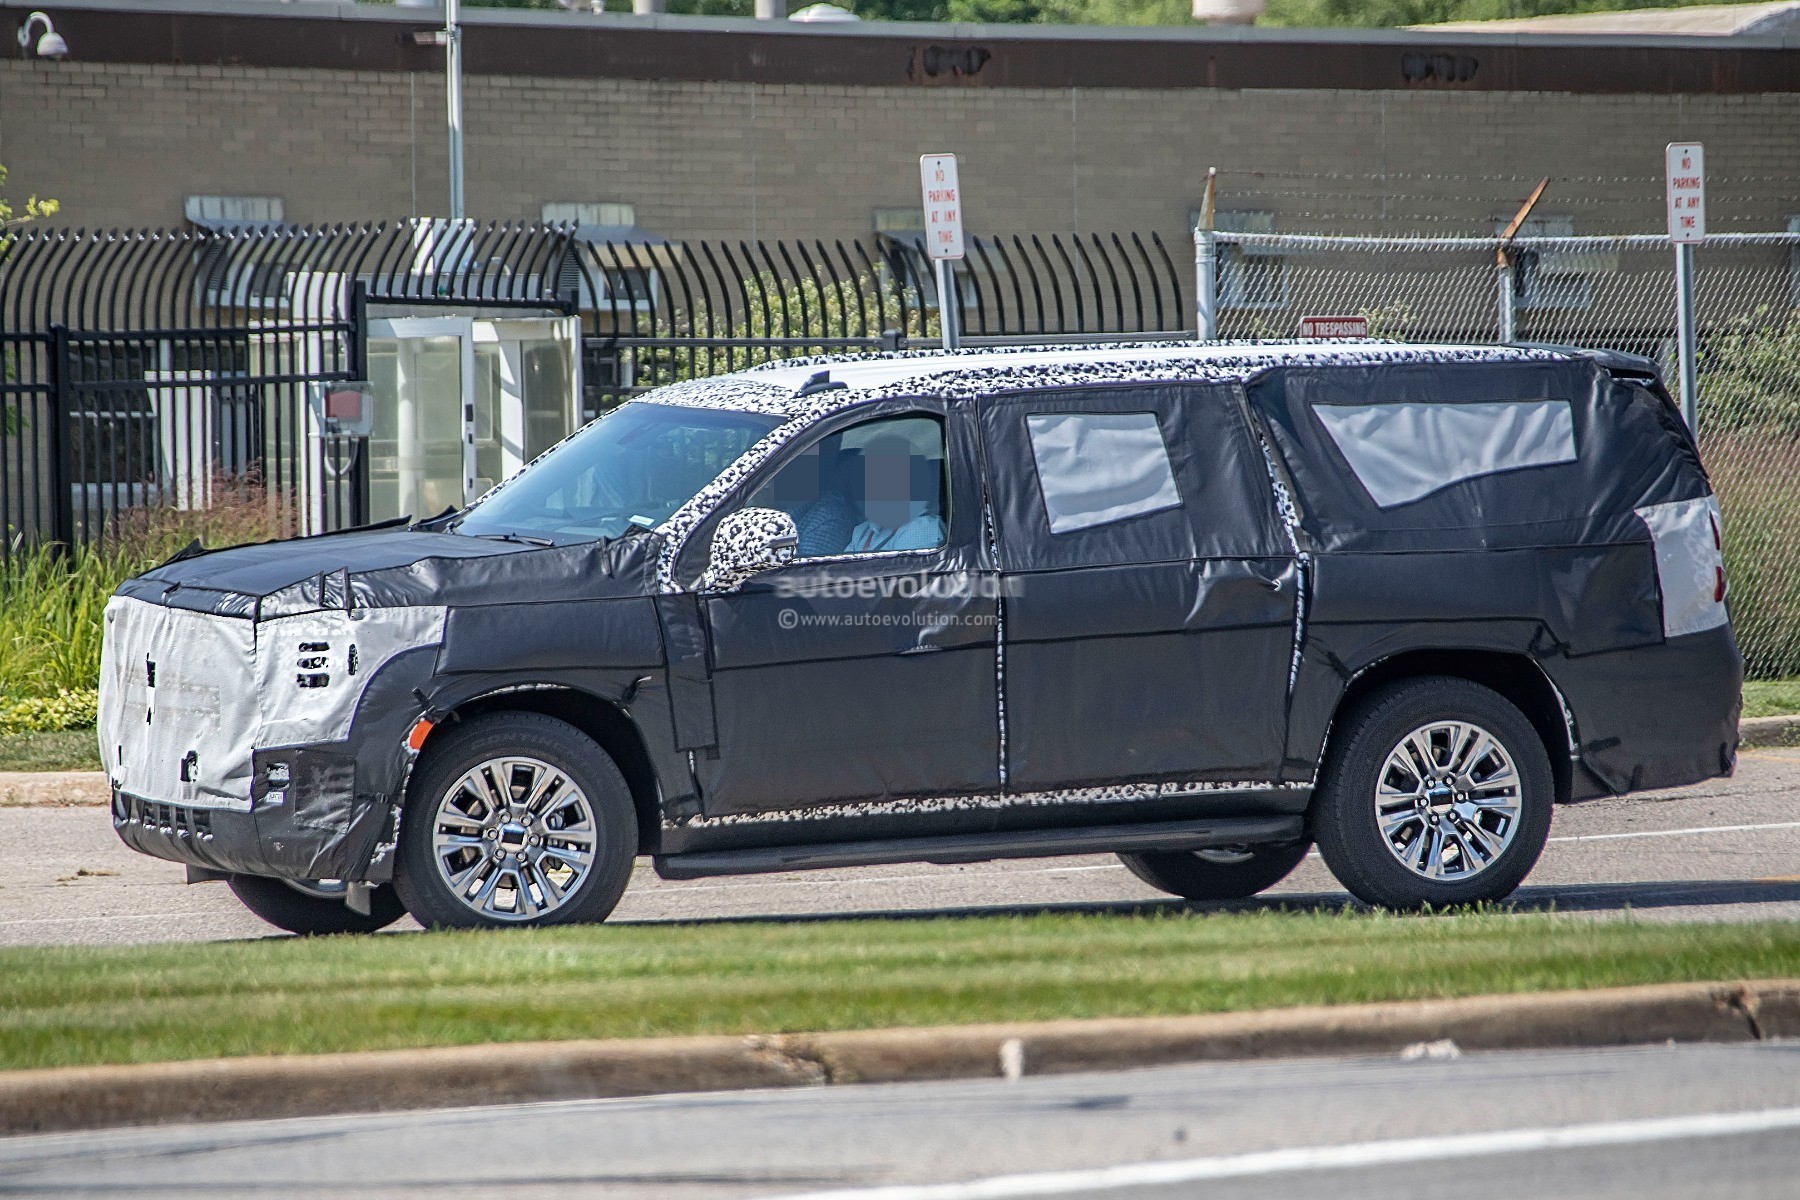 2021 GMC Yukon Spied In XL Denali Configuration Out In the Wild.